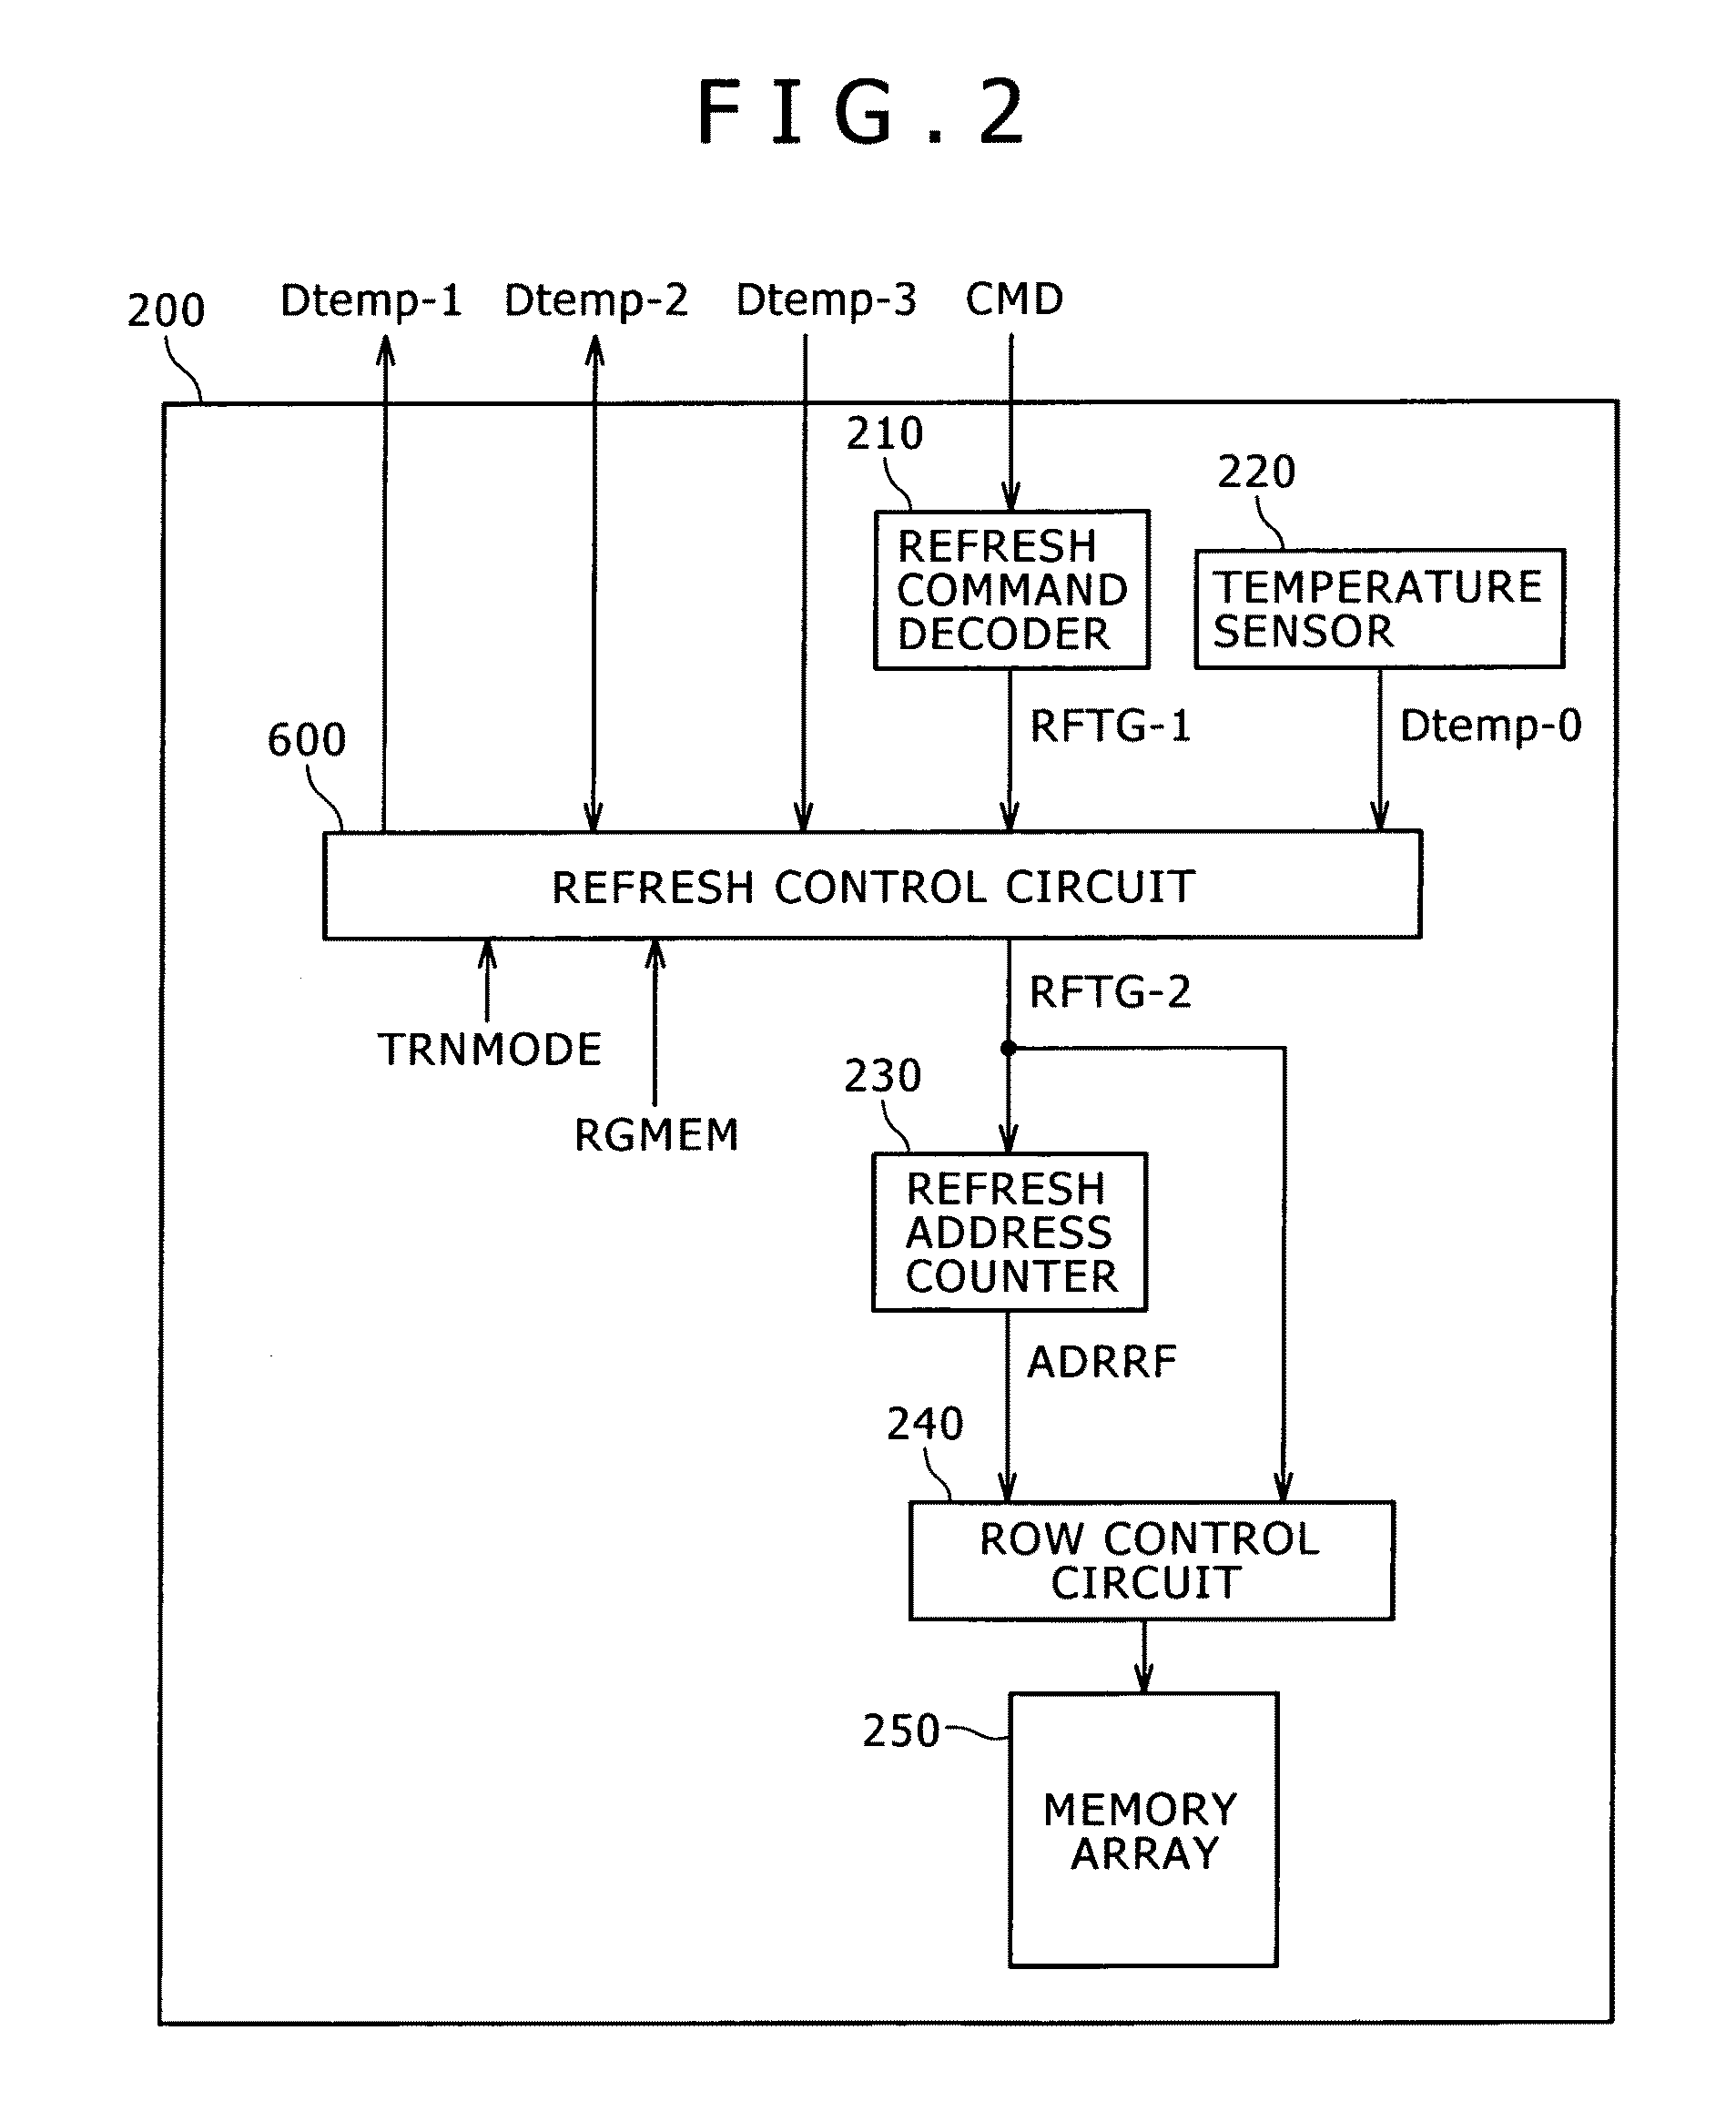 Storage control device controlling refresh frequency based on temperature